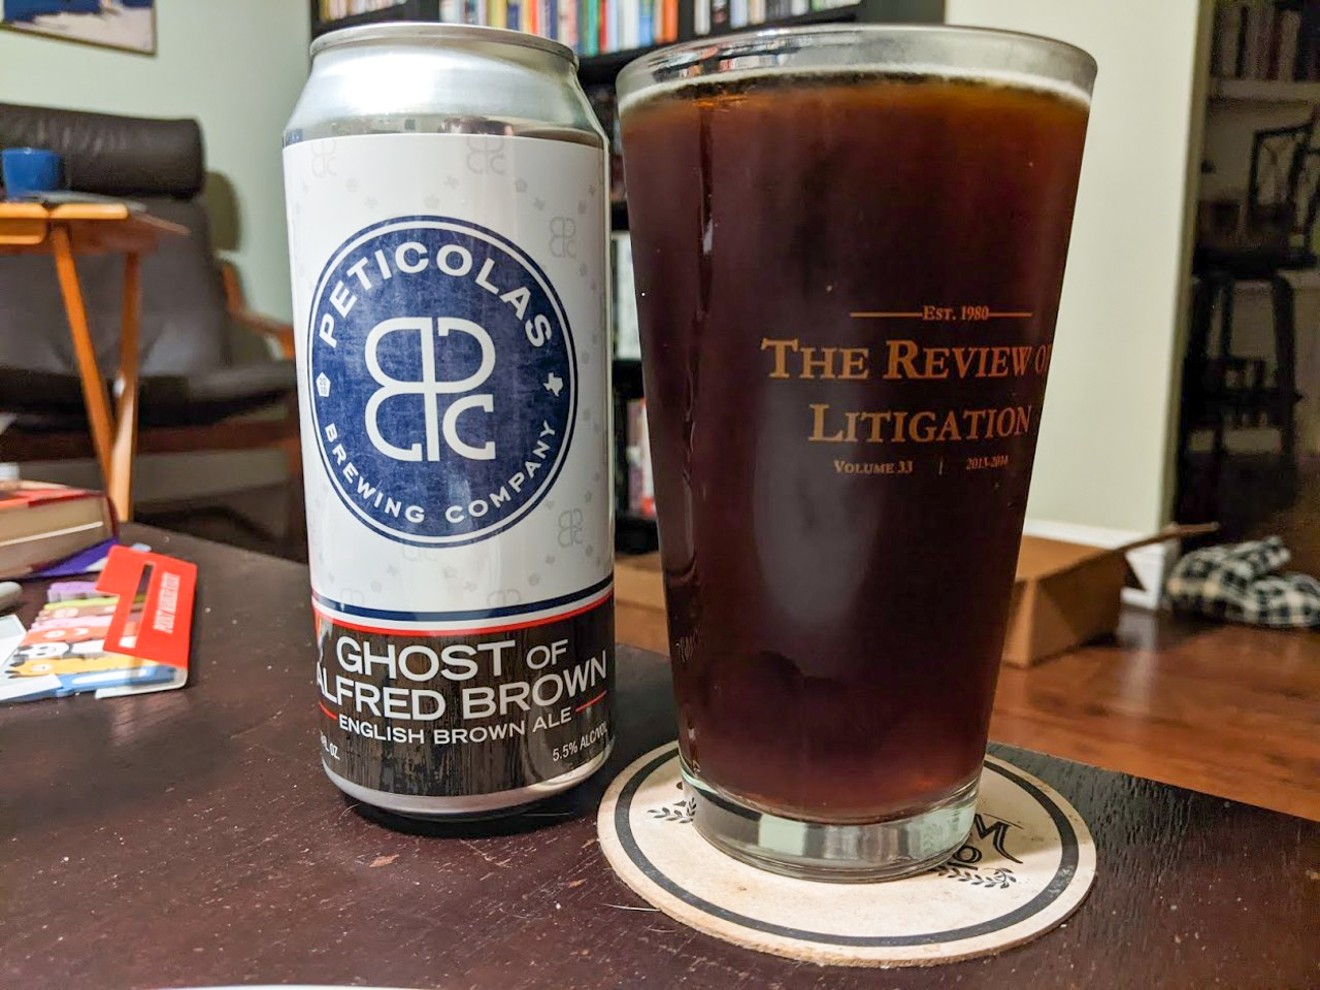 Ghost of Alfred Brown, poured into a law school pint glass to honor former attorney and brewery owner Michael Peticolas.